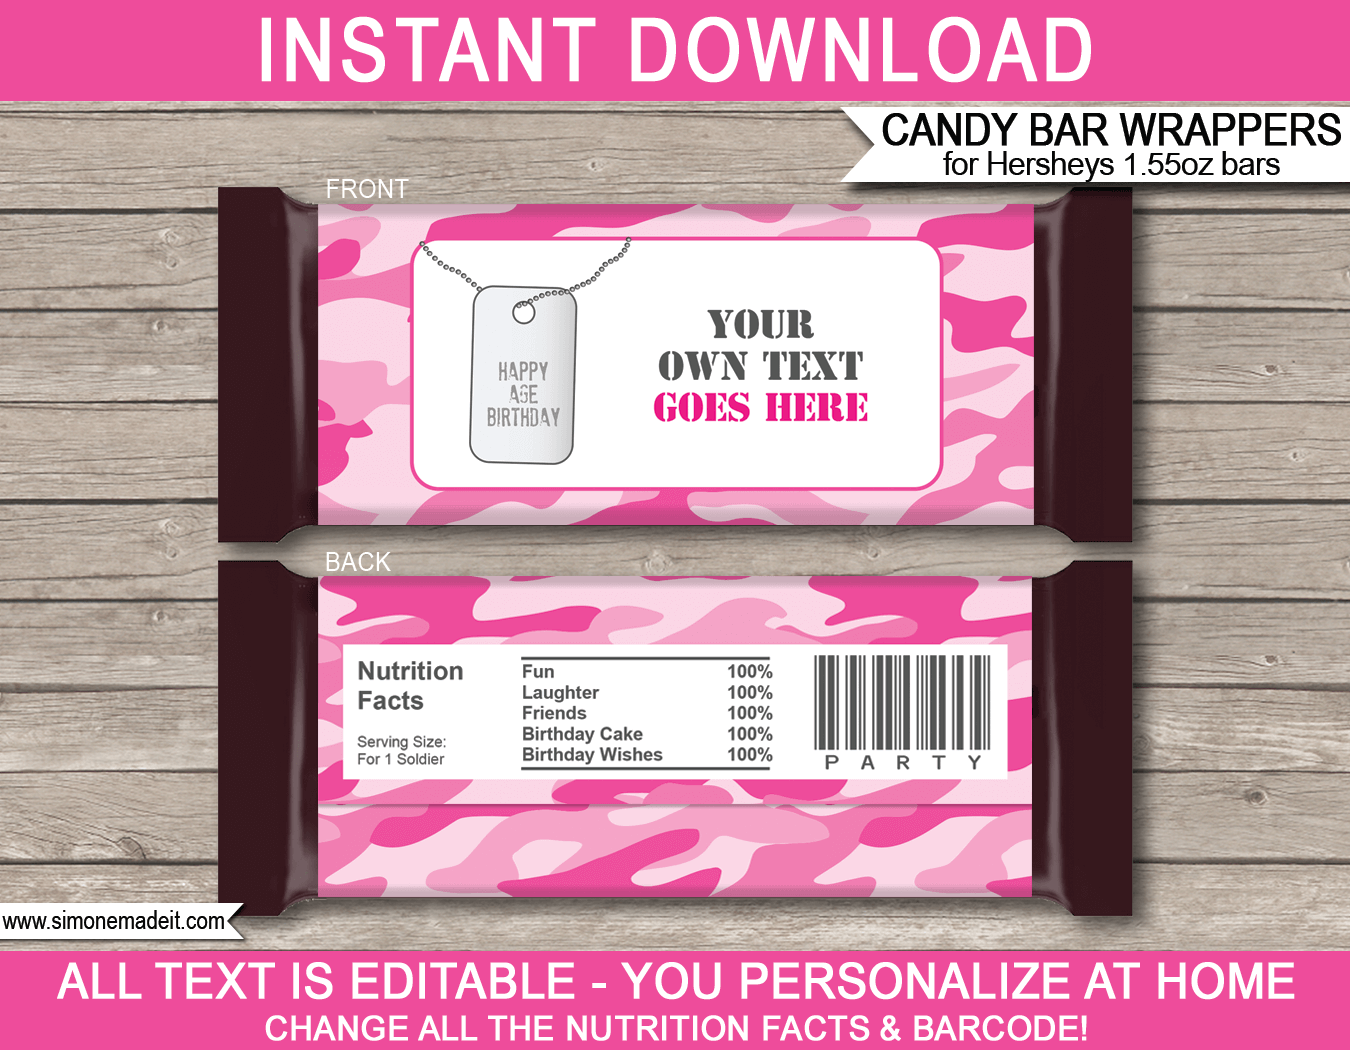 Pink Camo Hershey Candy Bar Wrappers | Birthday Party Favors | Personalized Candy Bars | Editable Template | INSTANT DOWNLOAD $3.00 via simonemadeit.com